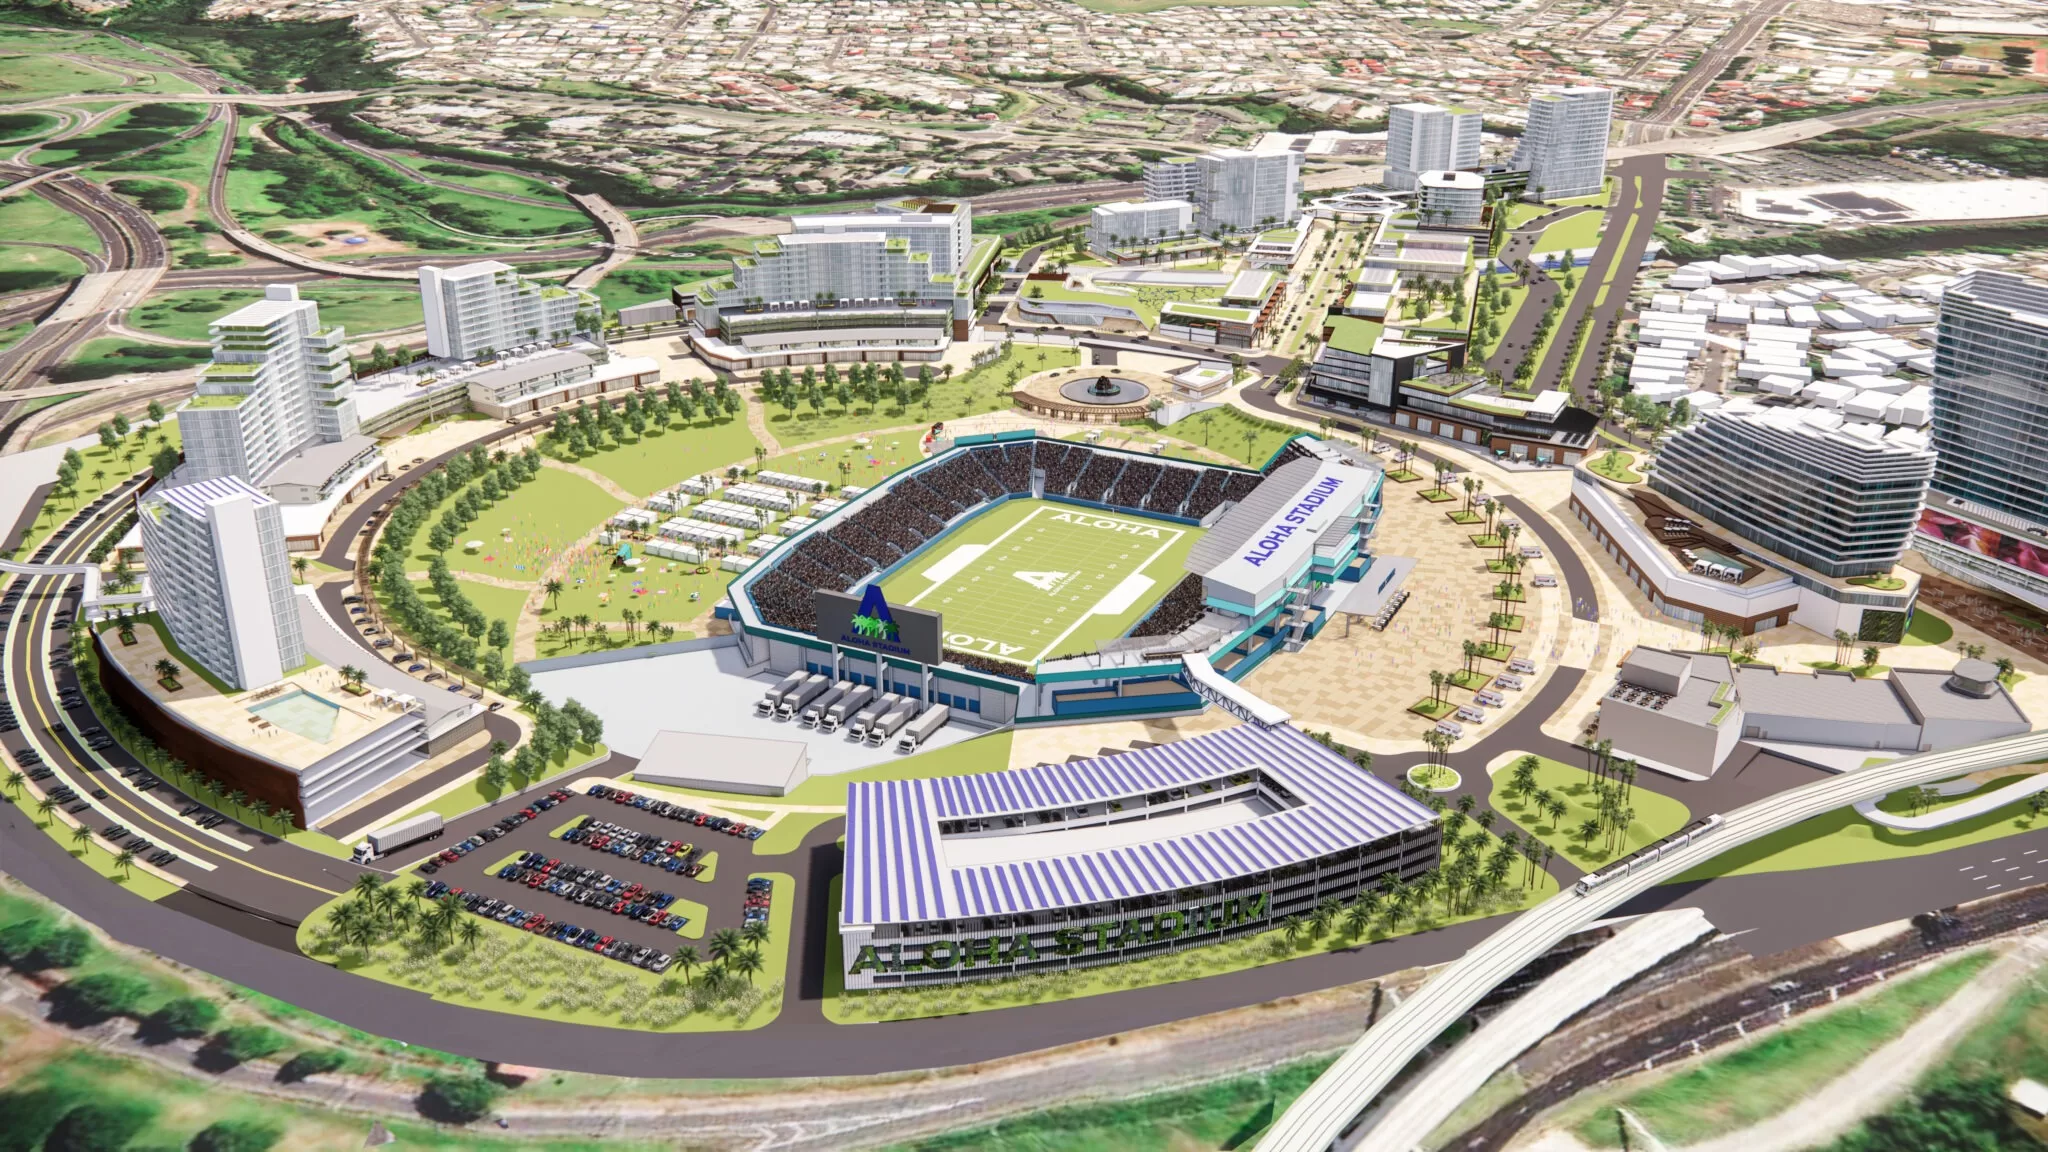 The competition to develop the New Aloha Stadium Entertainment District has narrowed down to one group.